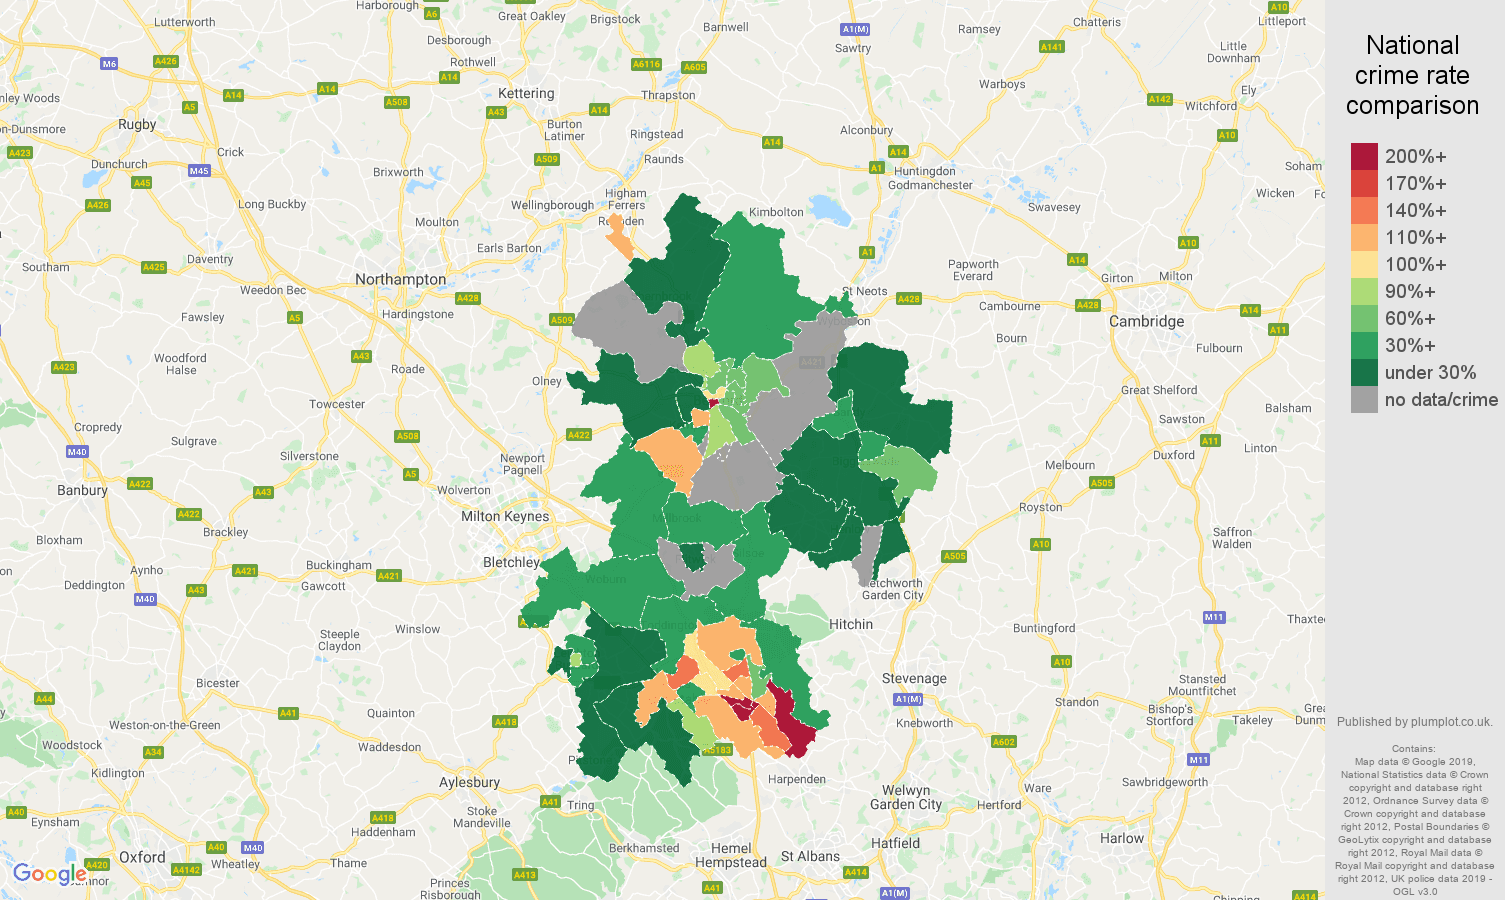 Bedfordshire possession of weapons crime rate comparison map